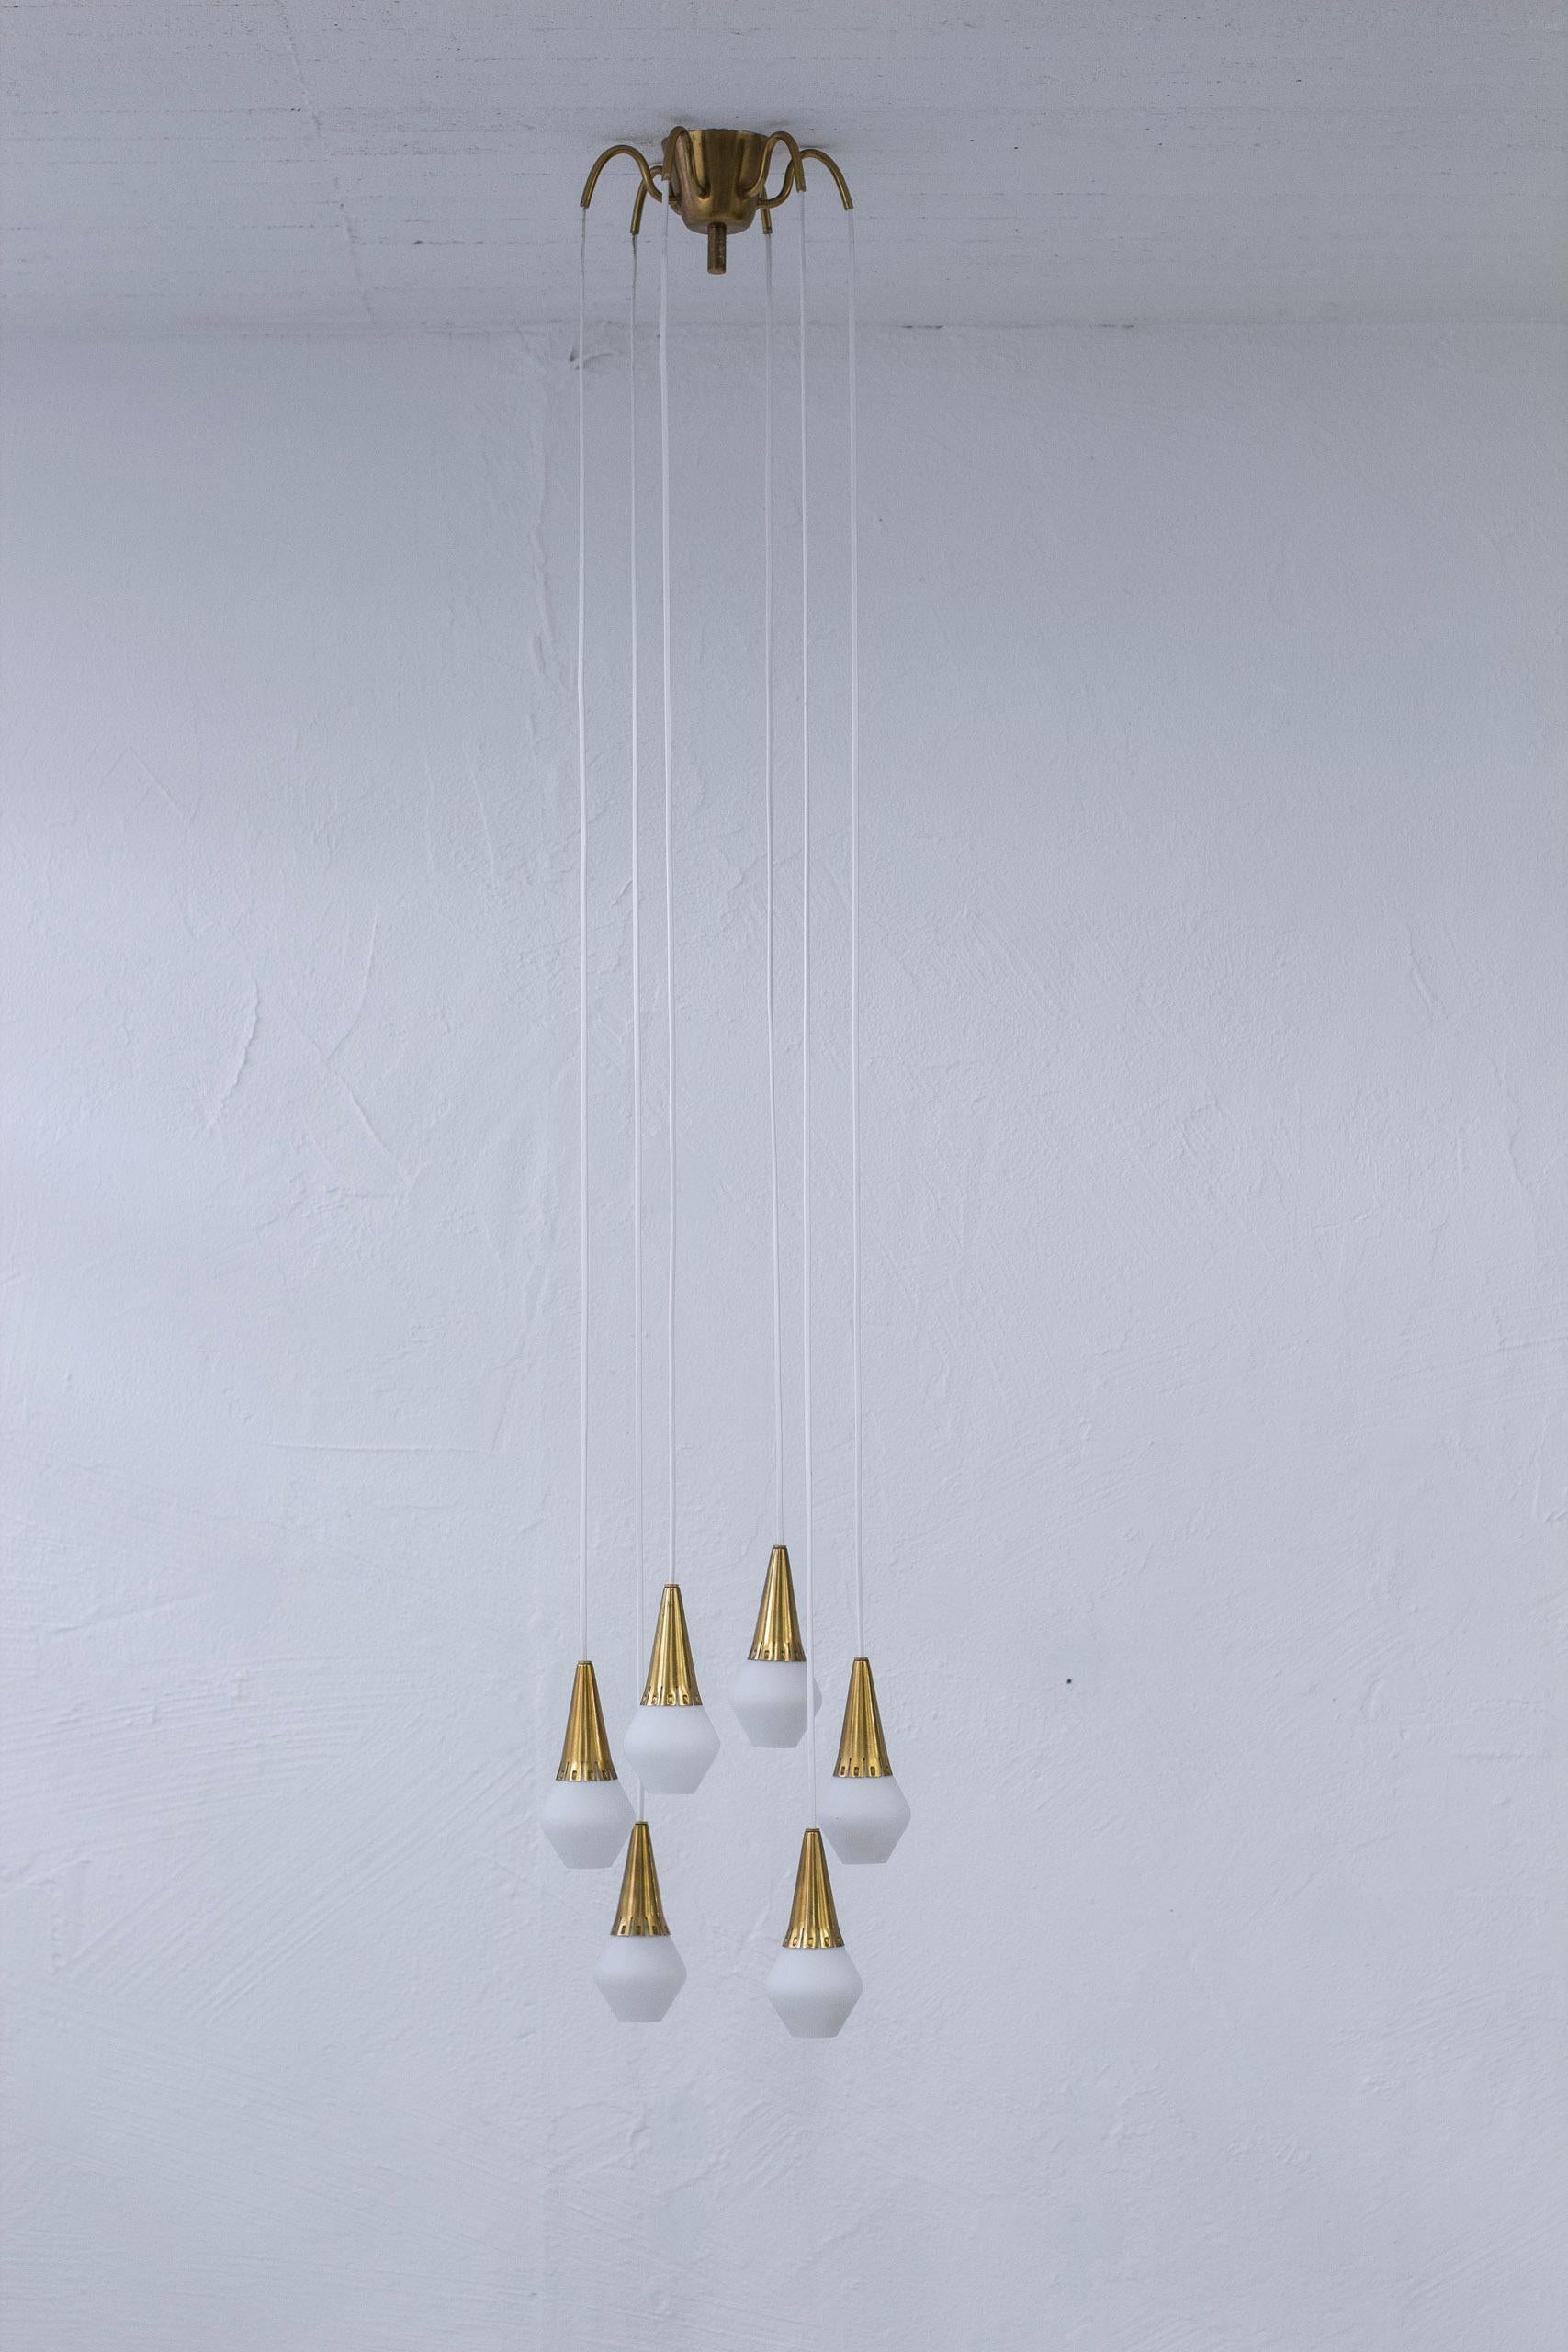 Ceiling pendant lamp designed by Harald Notini. produced in Sweden by Böhlmarks lampfabrik during the 1950s. Six hanging pendants attached to a six armed ceiling mount made from brass. Original glasses in white opaline. Very good vintage condition